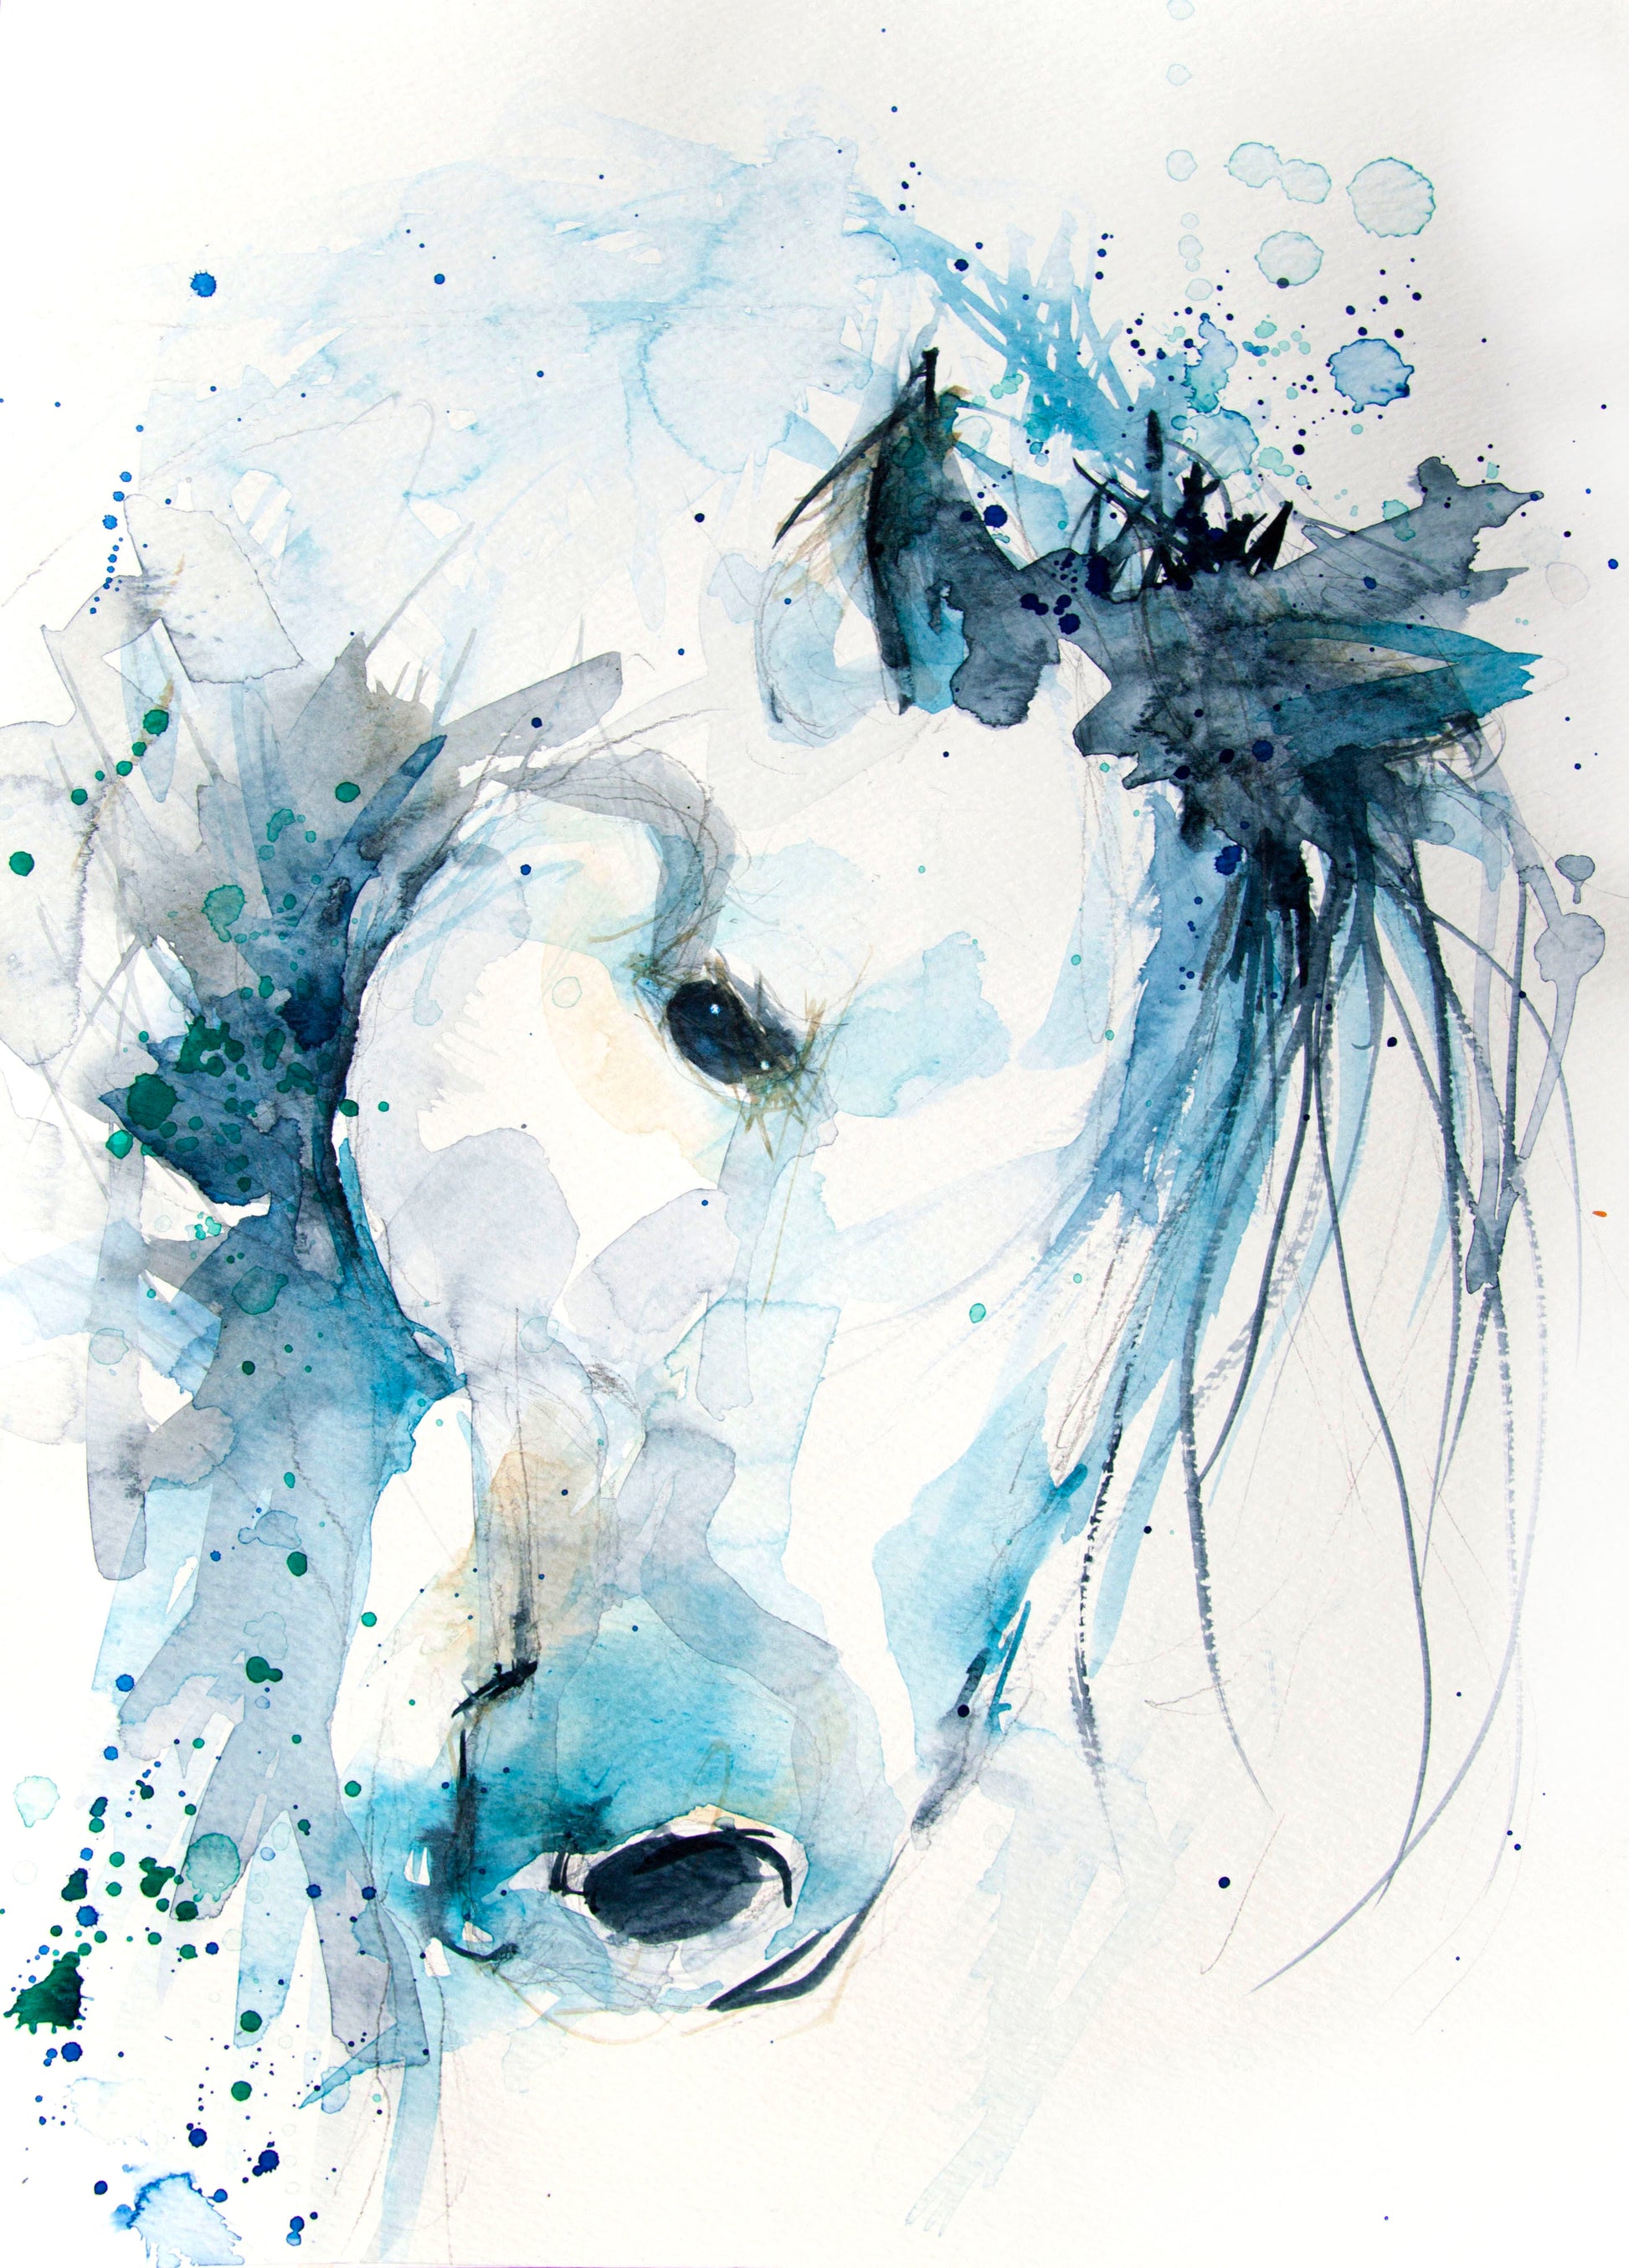 JEN BUCKLEY signed LIMITED EDITION PRINT of my original HORSE watercolour - Jen Buckley Art limited edition animal art prints